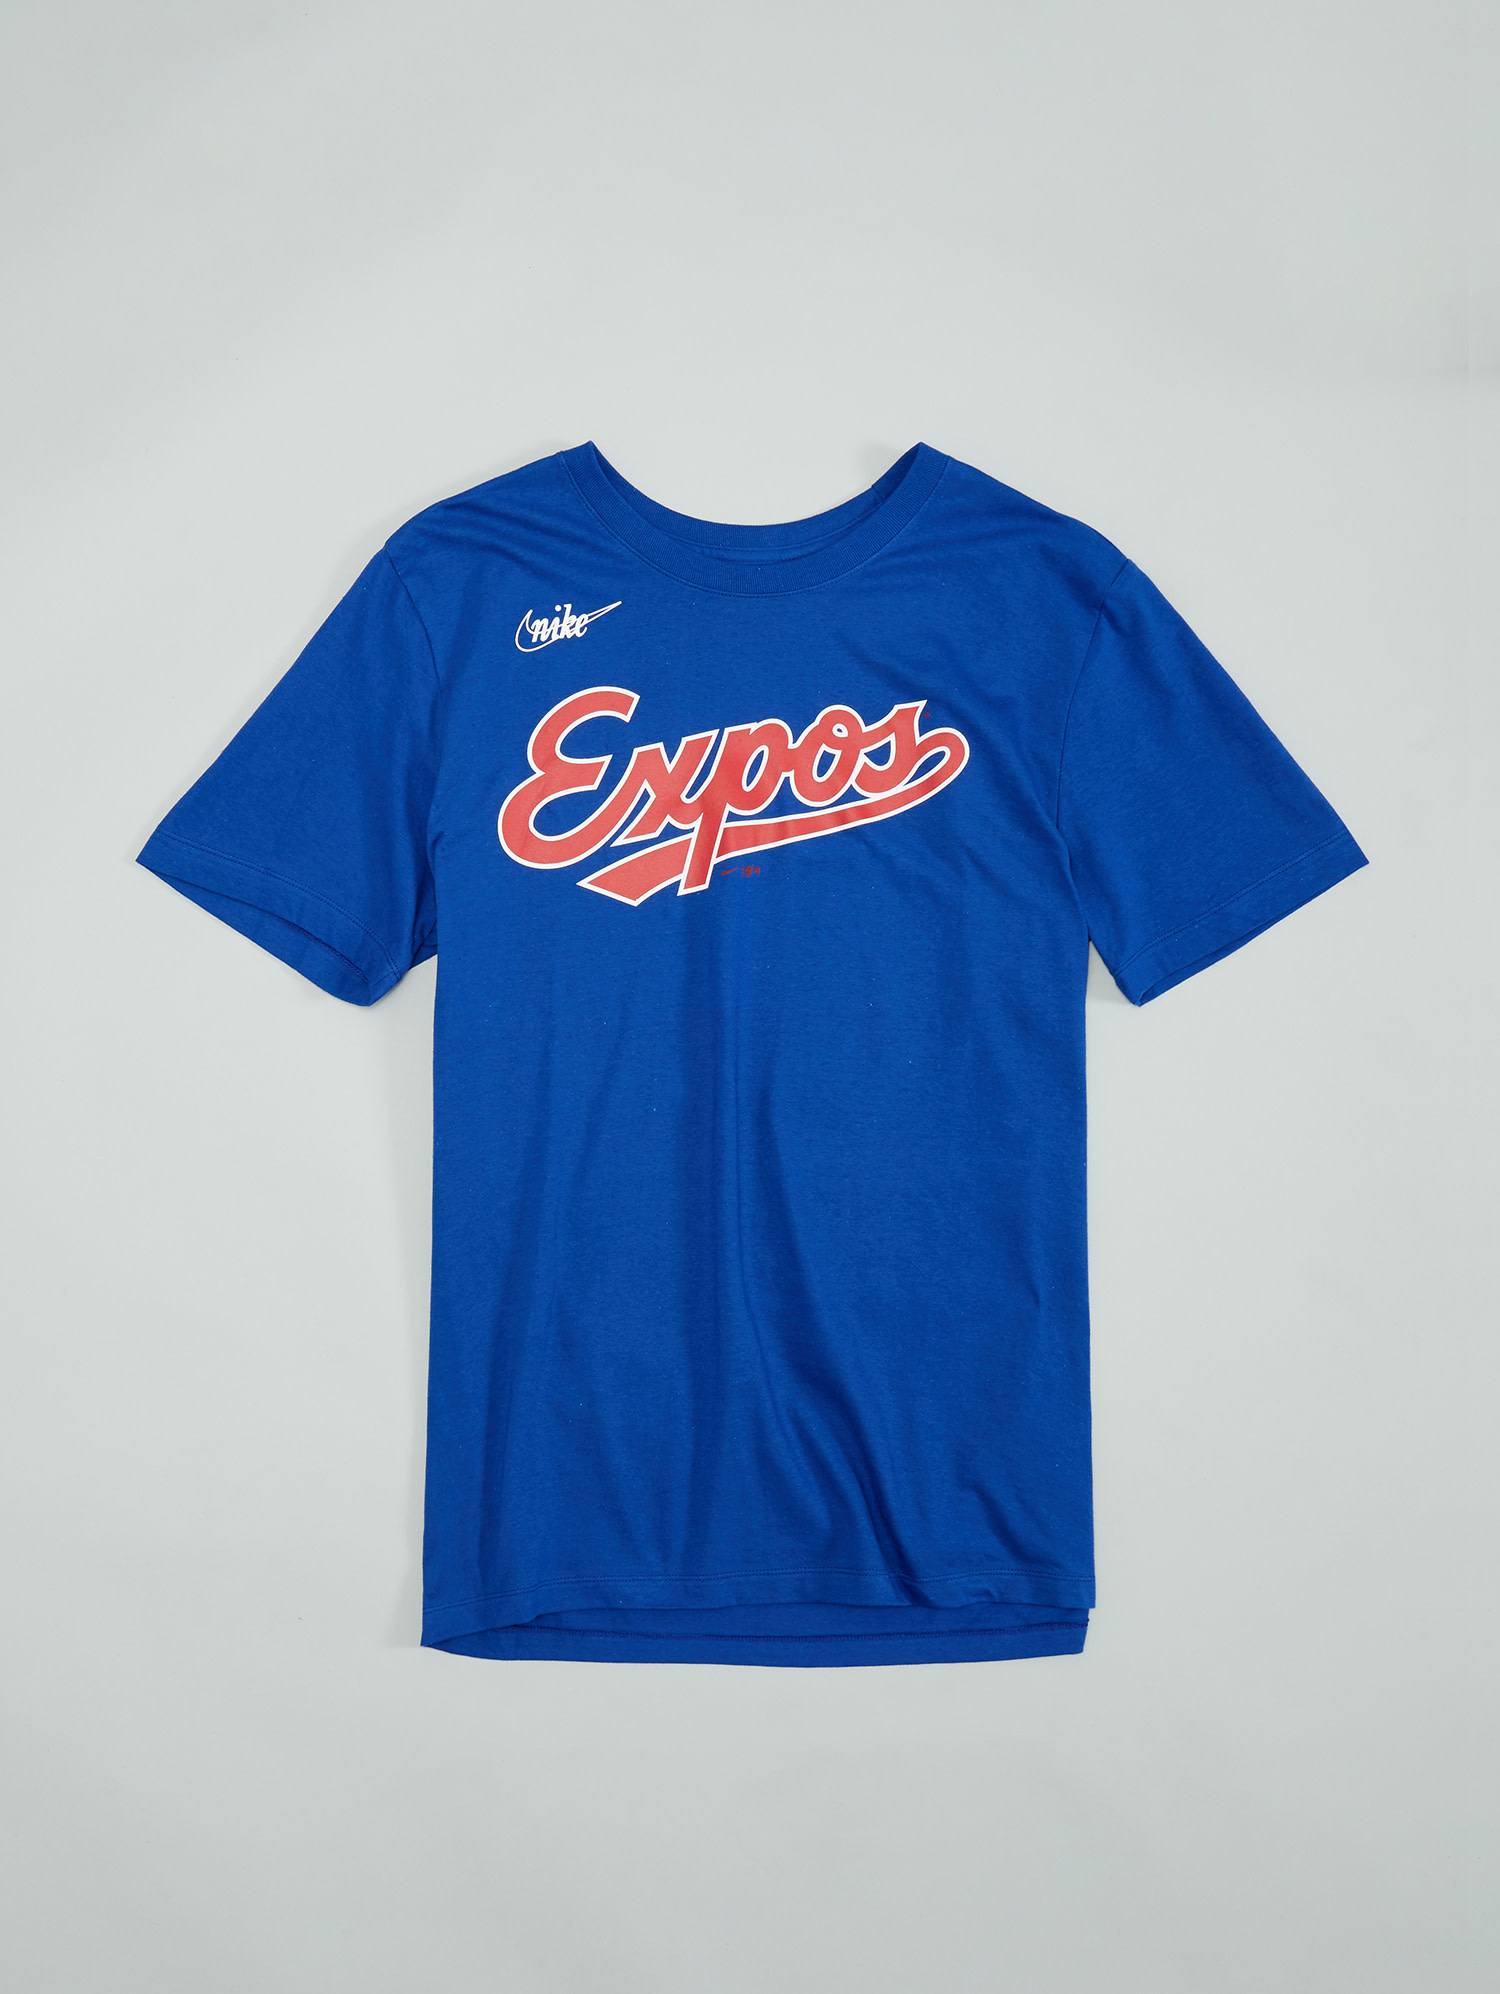 THJE0008 T-SHIRT JOUEUR EXPOS 30 RAINES - Tricolore Sports